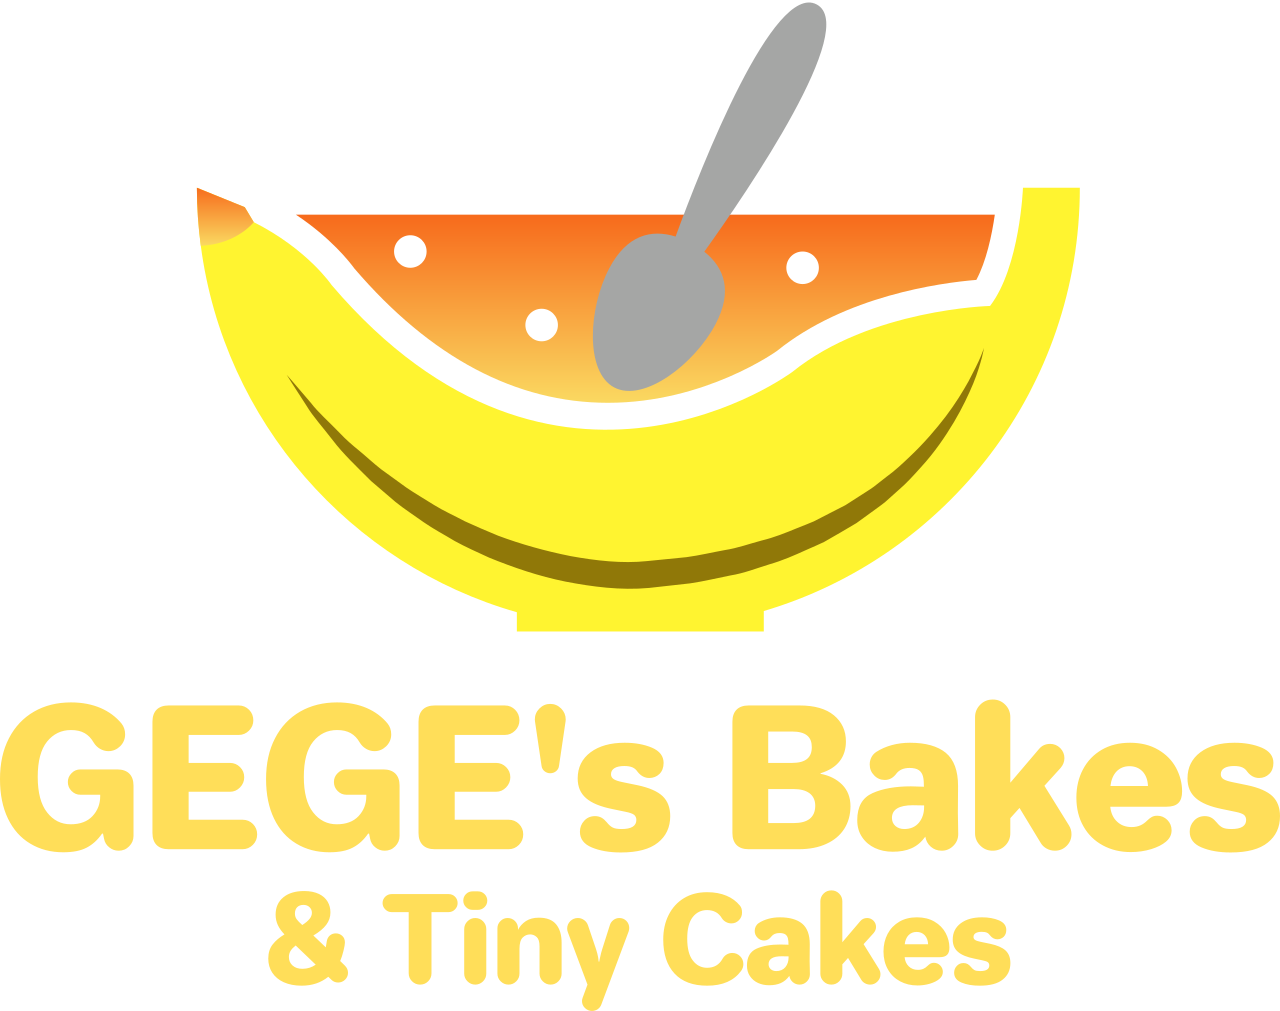 GEGE's Bakes's web page